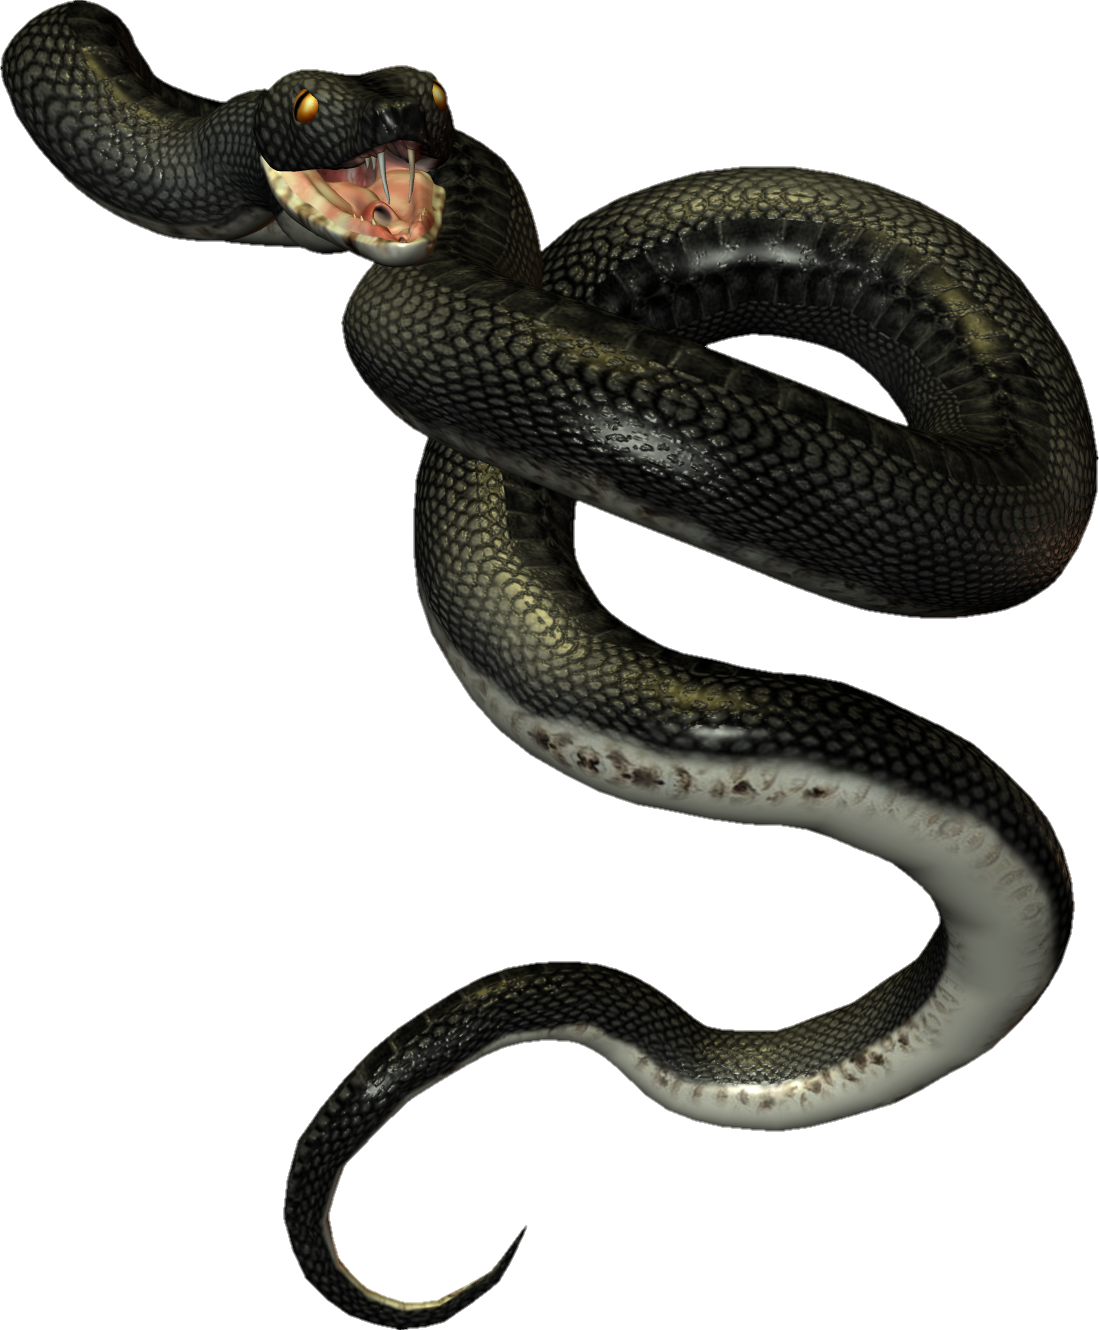 snake-png-image-pngfre-6